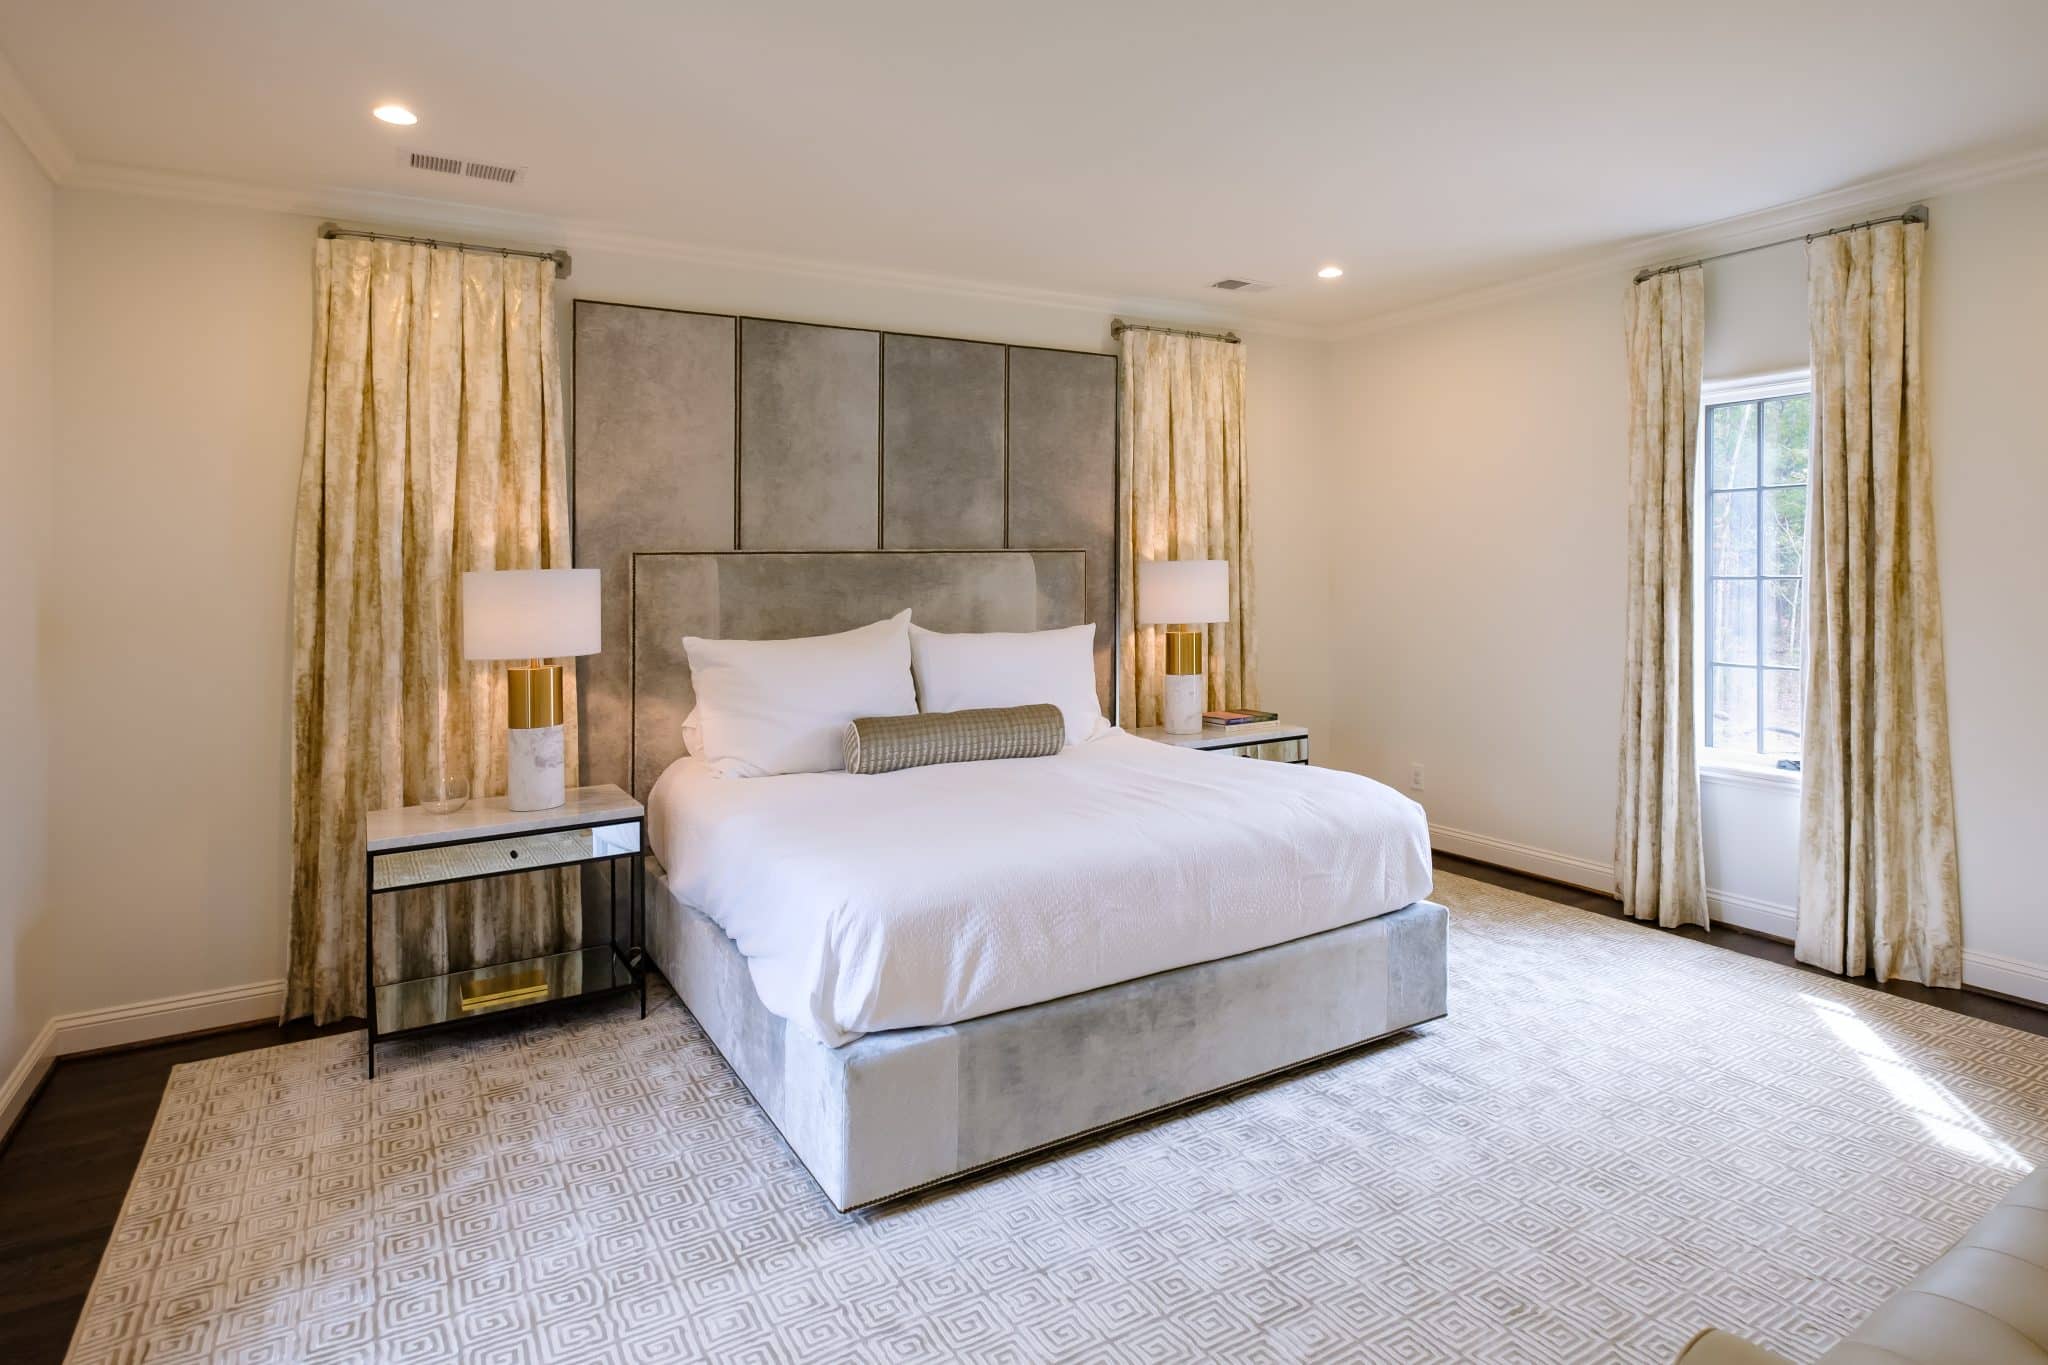 A luxury bedroom interior at Shoal Creek with a white, gold, and grey color scheme